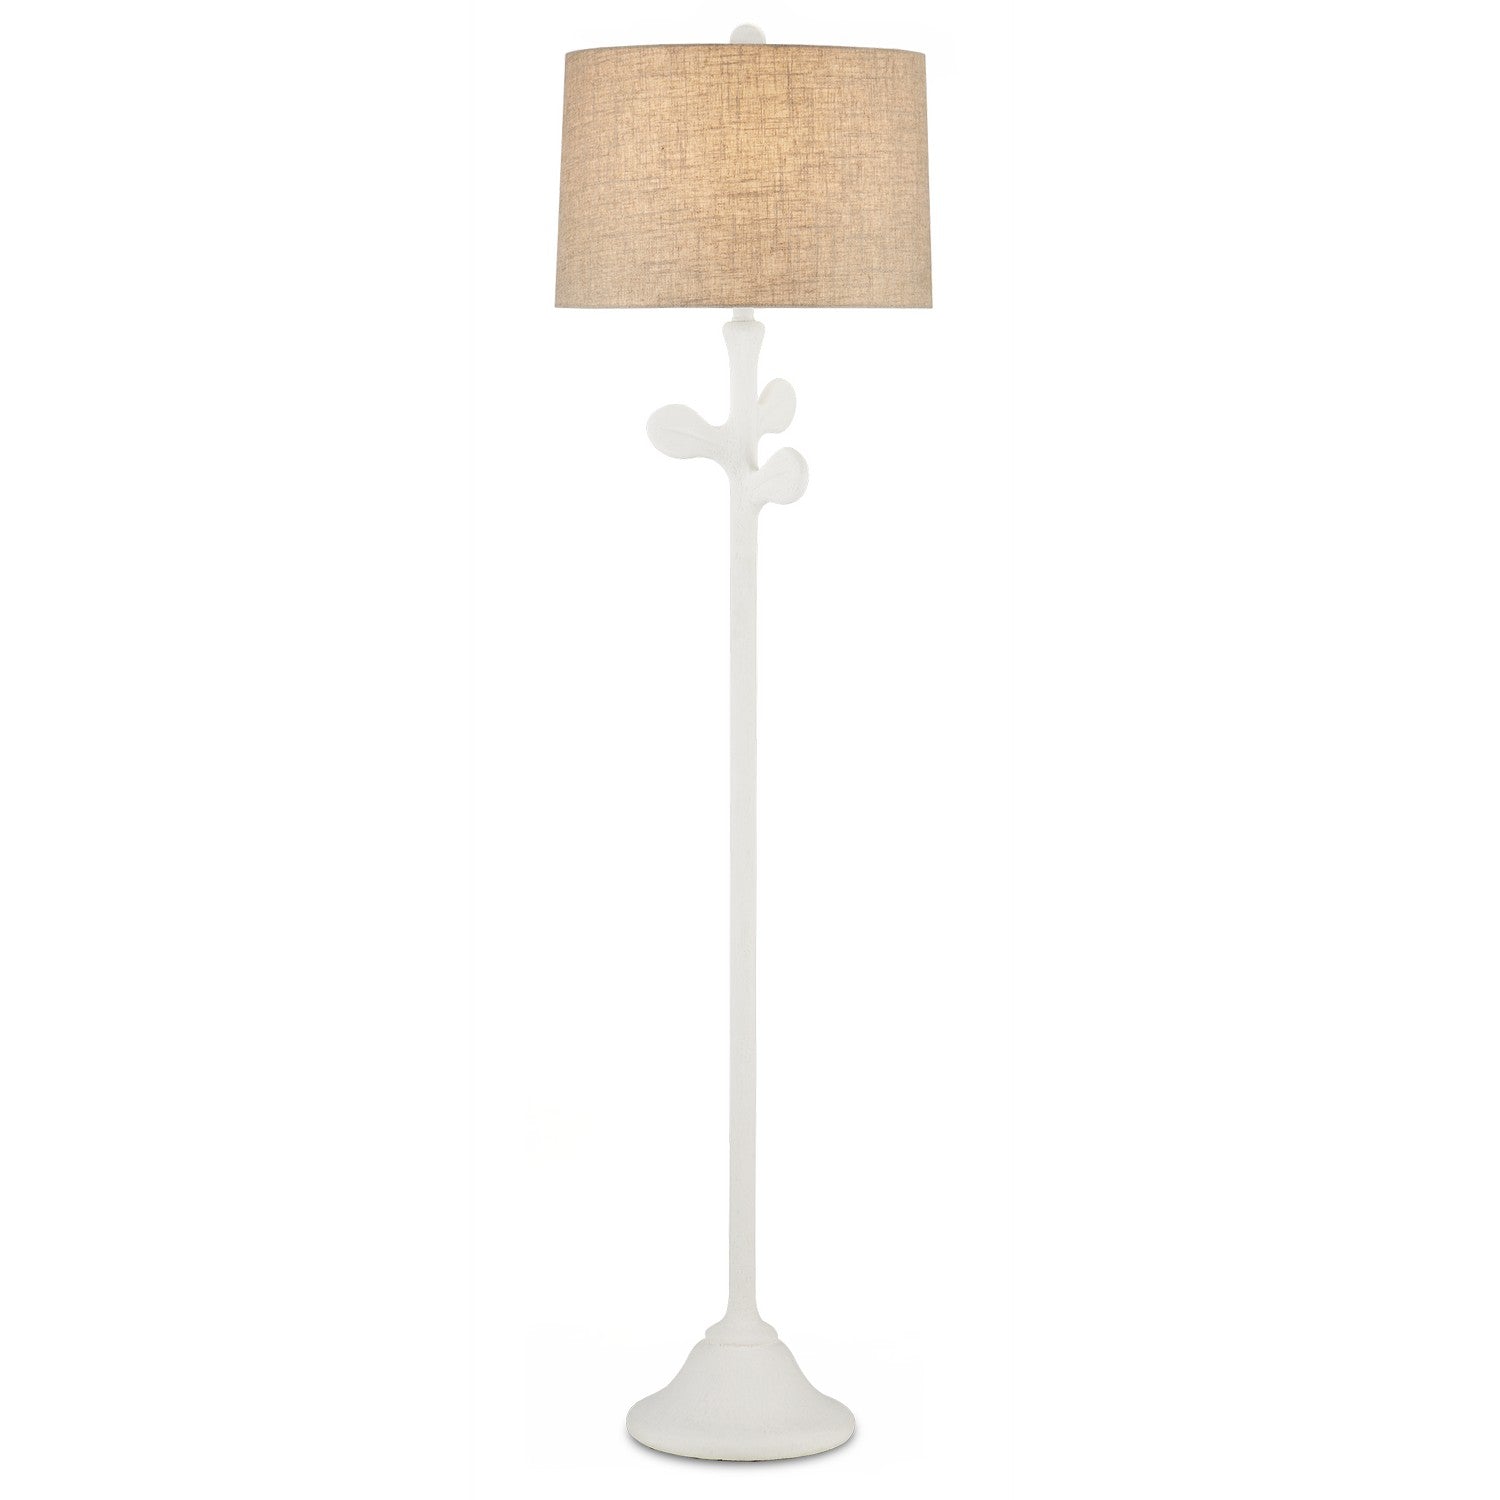 Currey and Company - 8000-0133 - One Light Floor Lamp - Gesso White